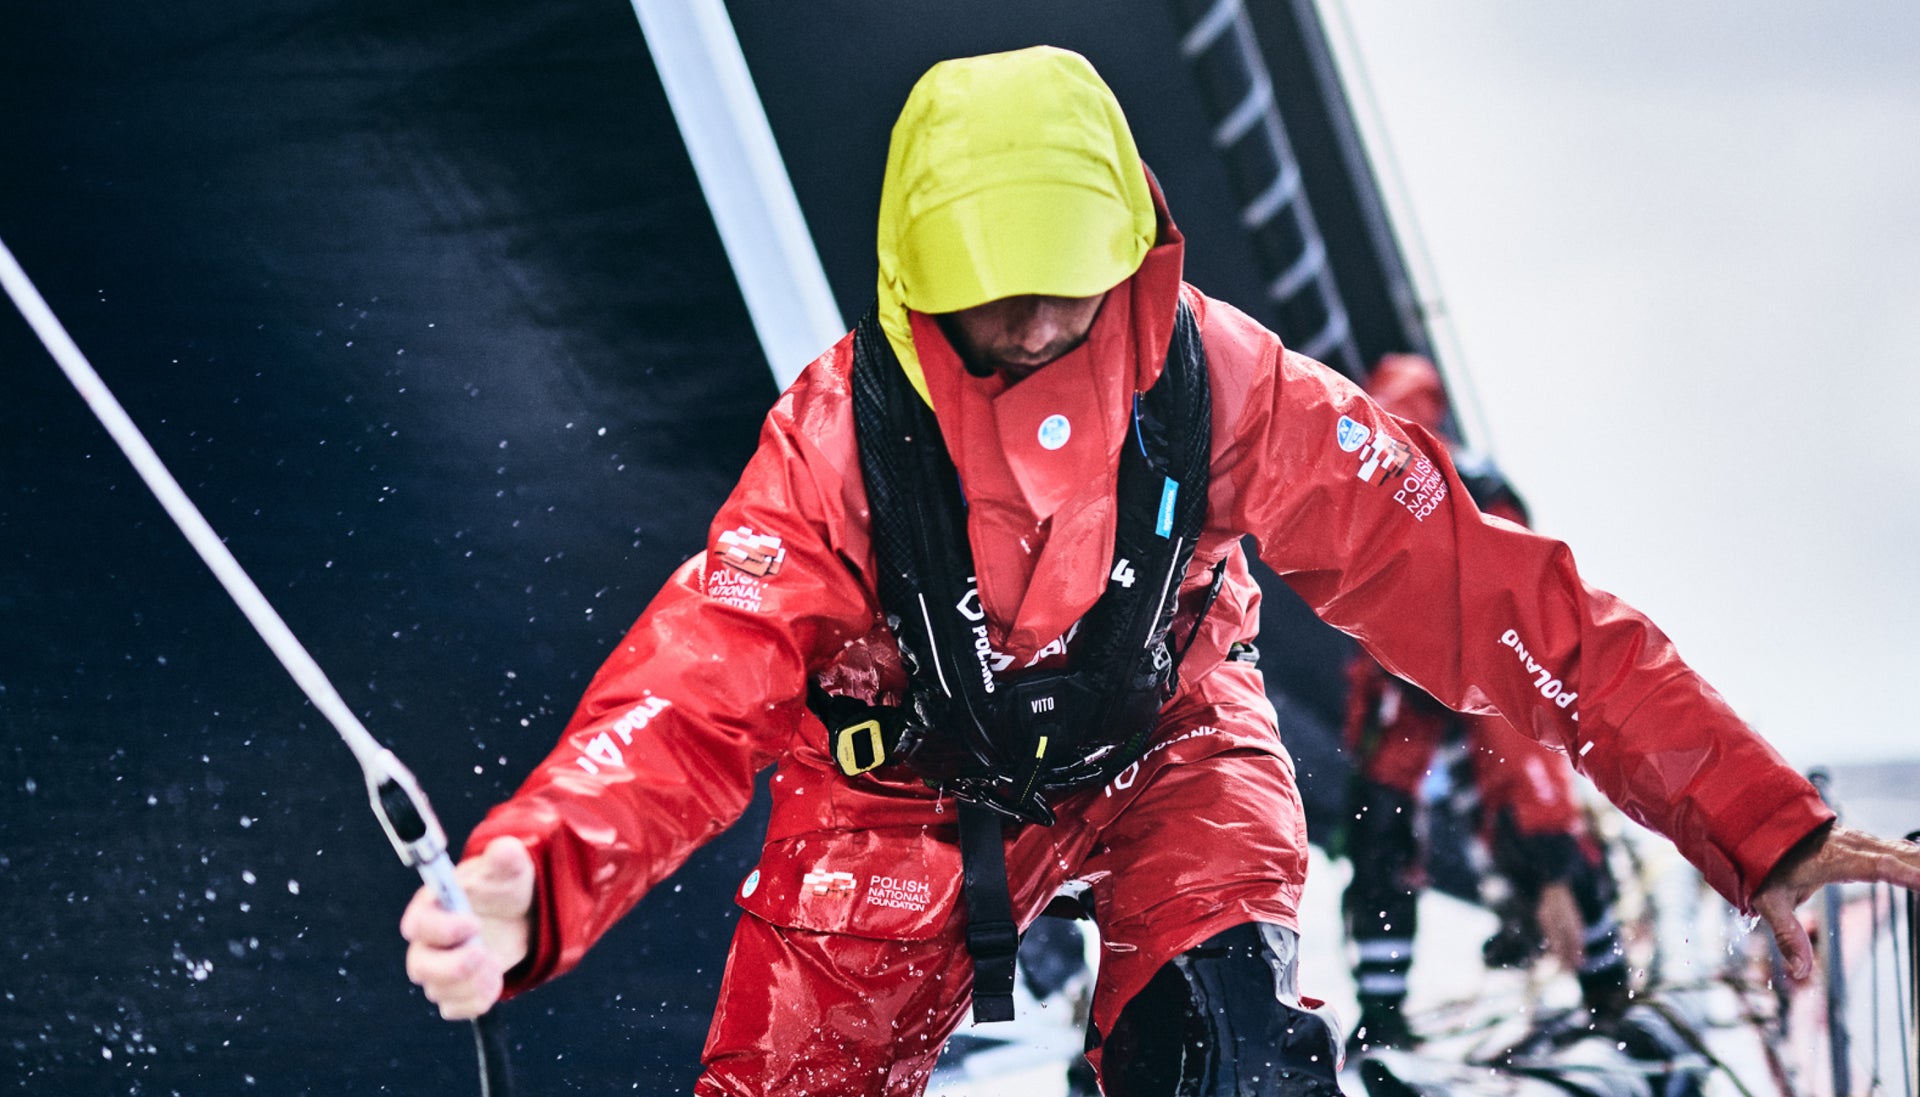 HOW TO CARE FOR YOUR FOUL WEATHER GEAR